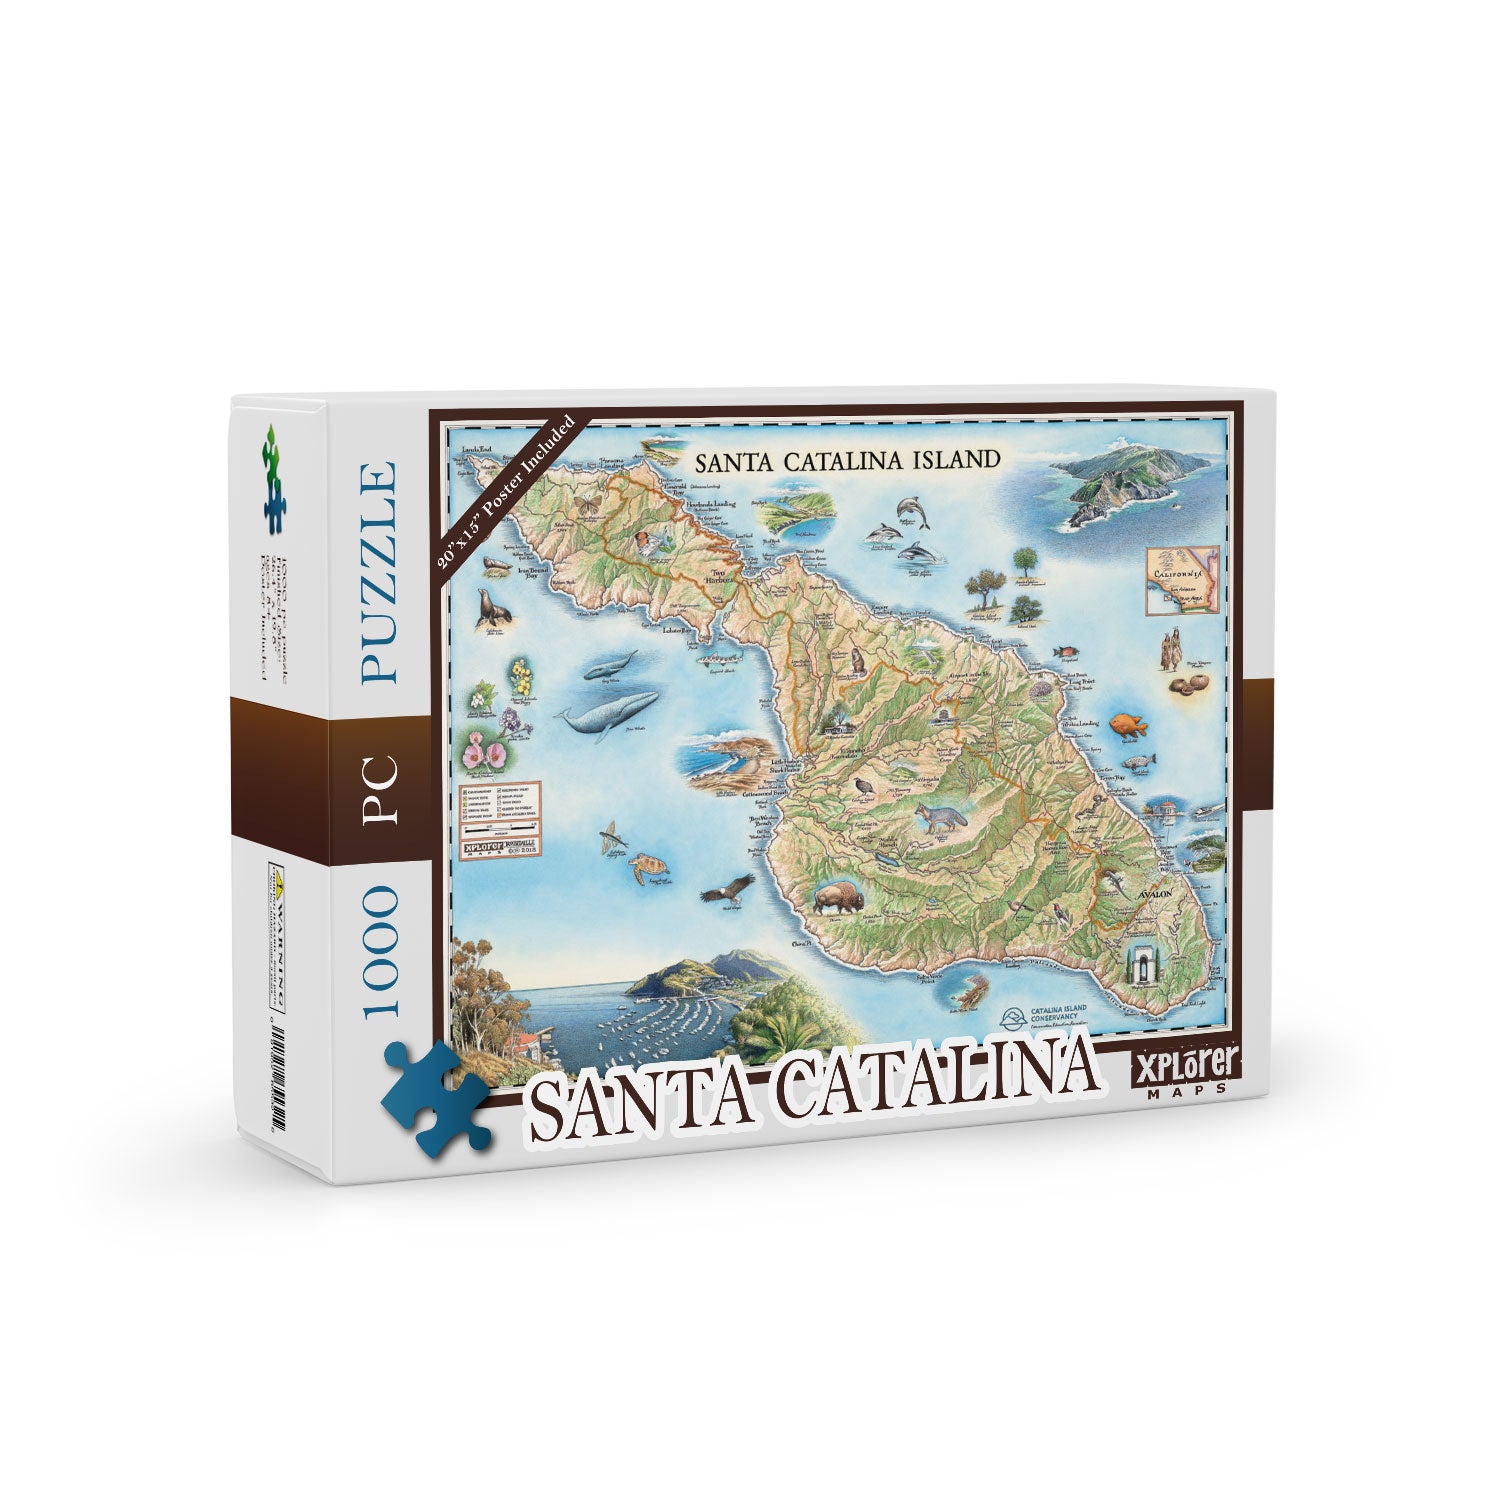 Santa Catalina Island Map Jigsaw Puzzle by Xplorer Maps. Features illustrations of places such as Wrigley Memorial, El Rancho Escondido, and Avalon Bay. Flora and fauna include Bison, Catalina Island Fox, Catalina Orange Lip butterfly, Channel Islands tree poppy, and Island oak.